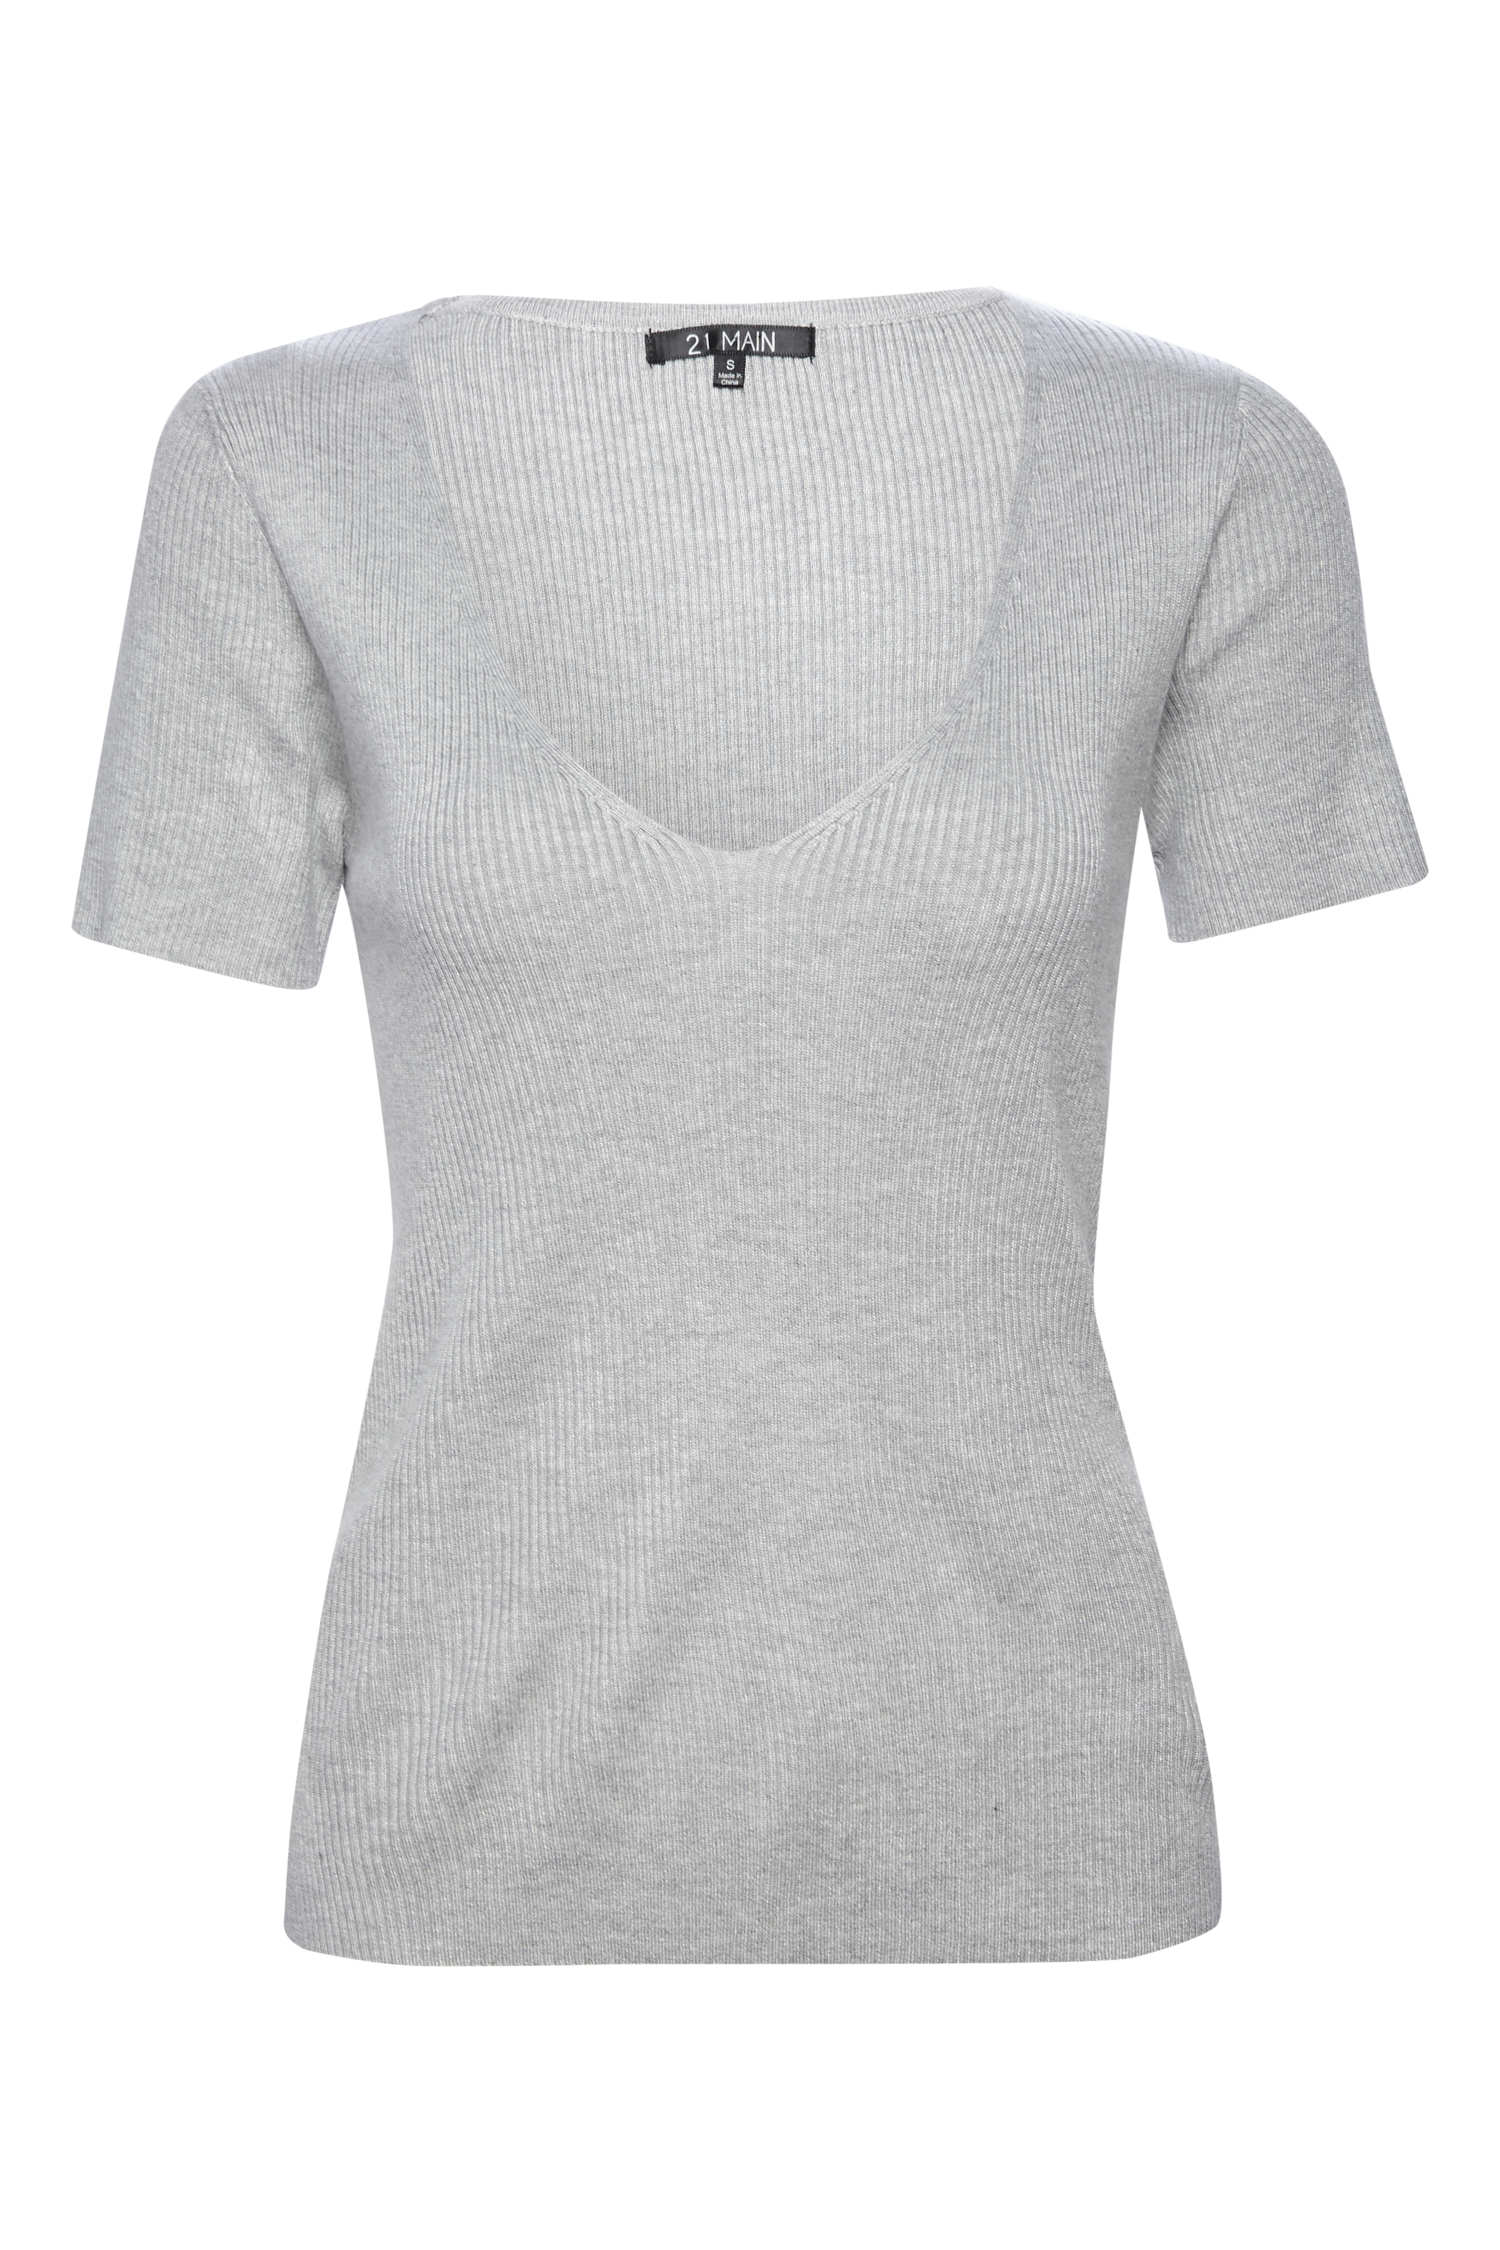 V Neck Fitted T-Shirt in Light Heather Grey M | DAILYLOOK